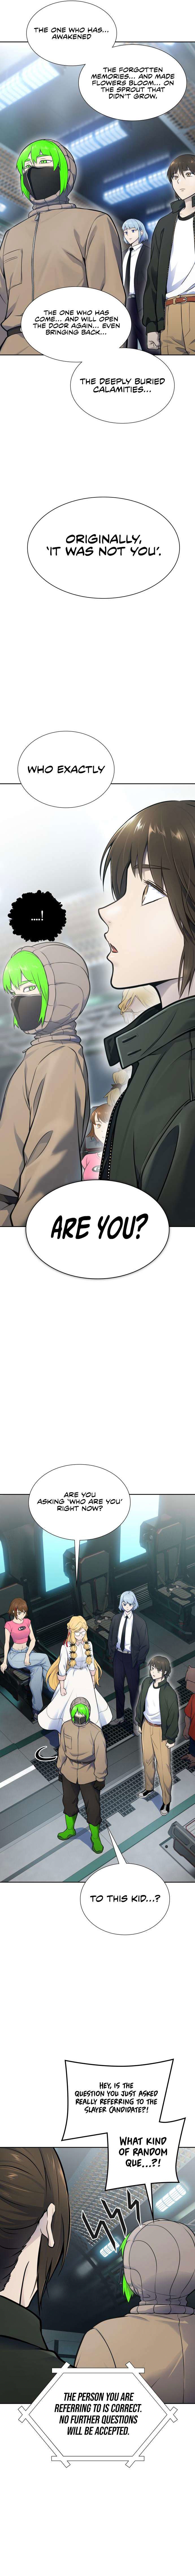 Tower of God Chapter 597 page 11